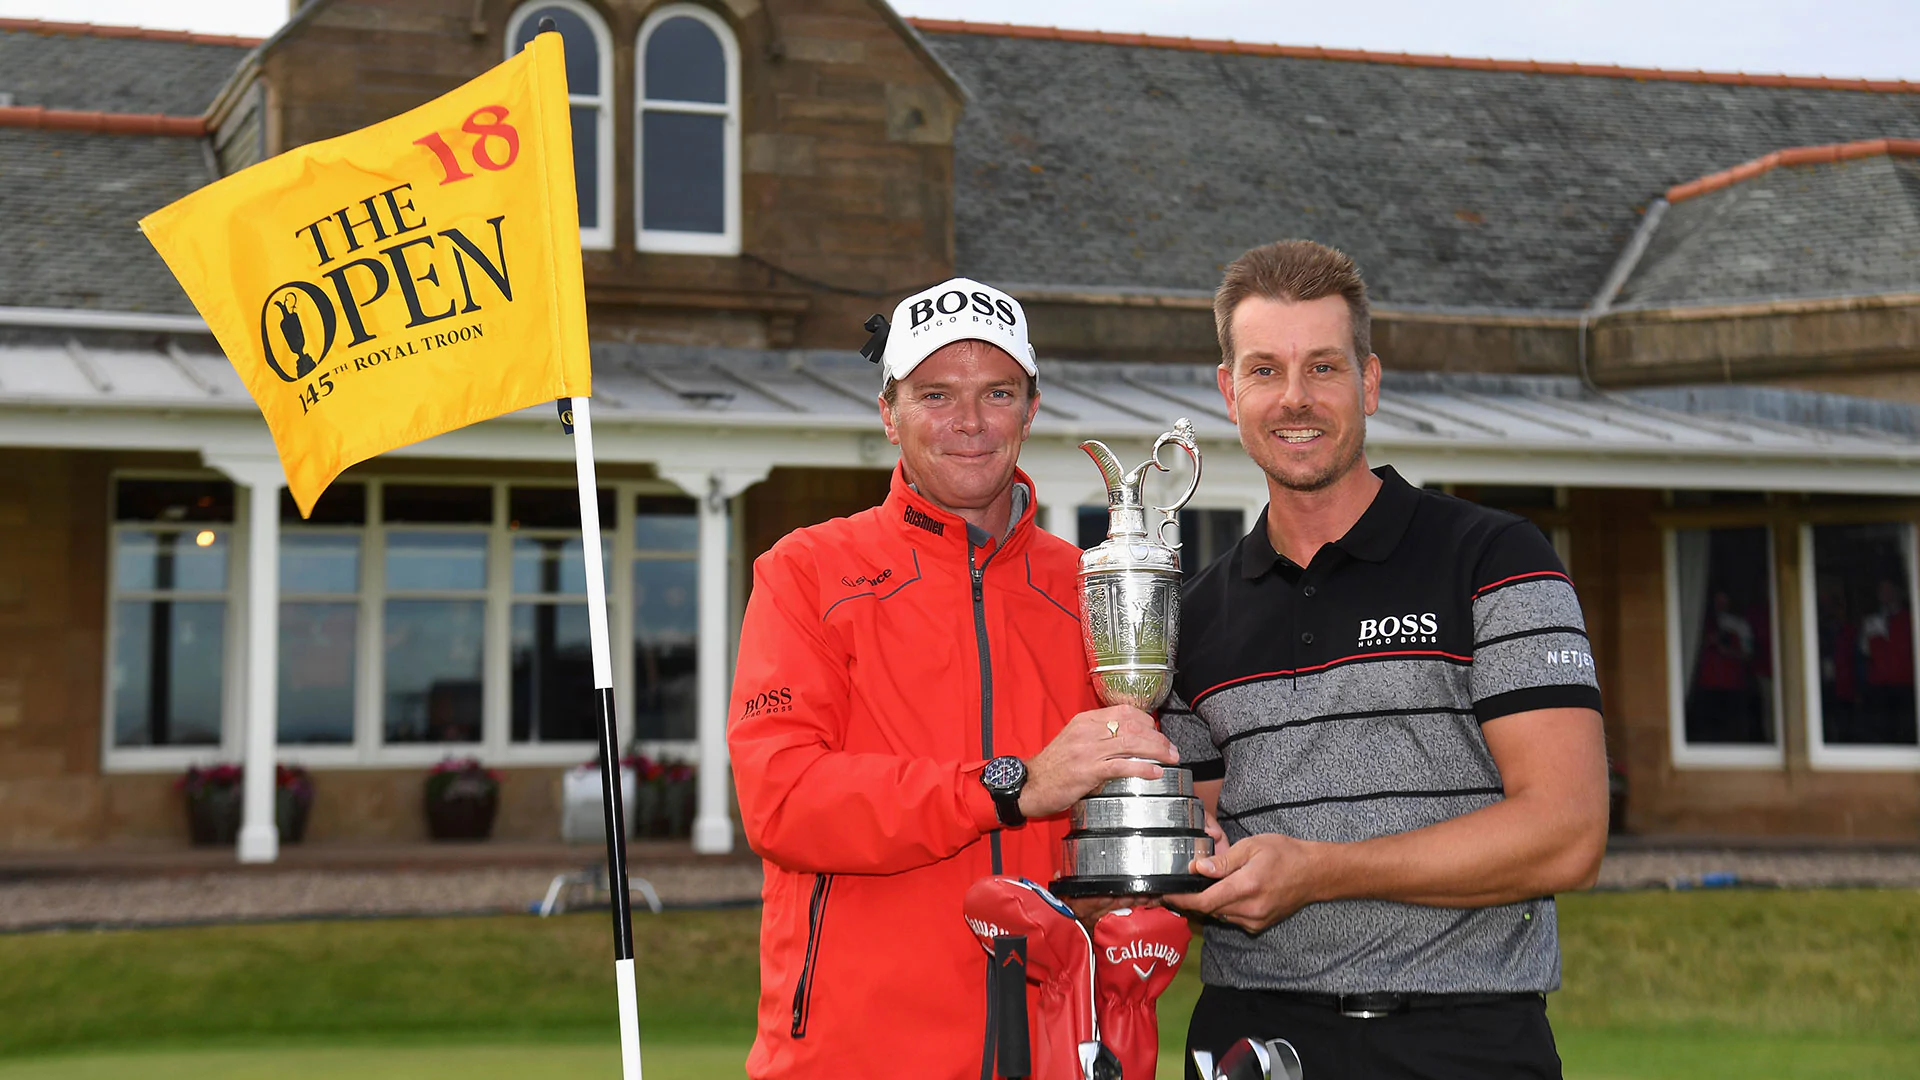 Stenson's Open bet with caddie didn't pan out